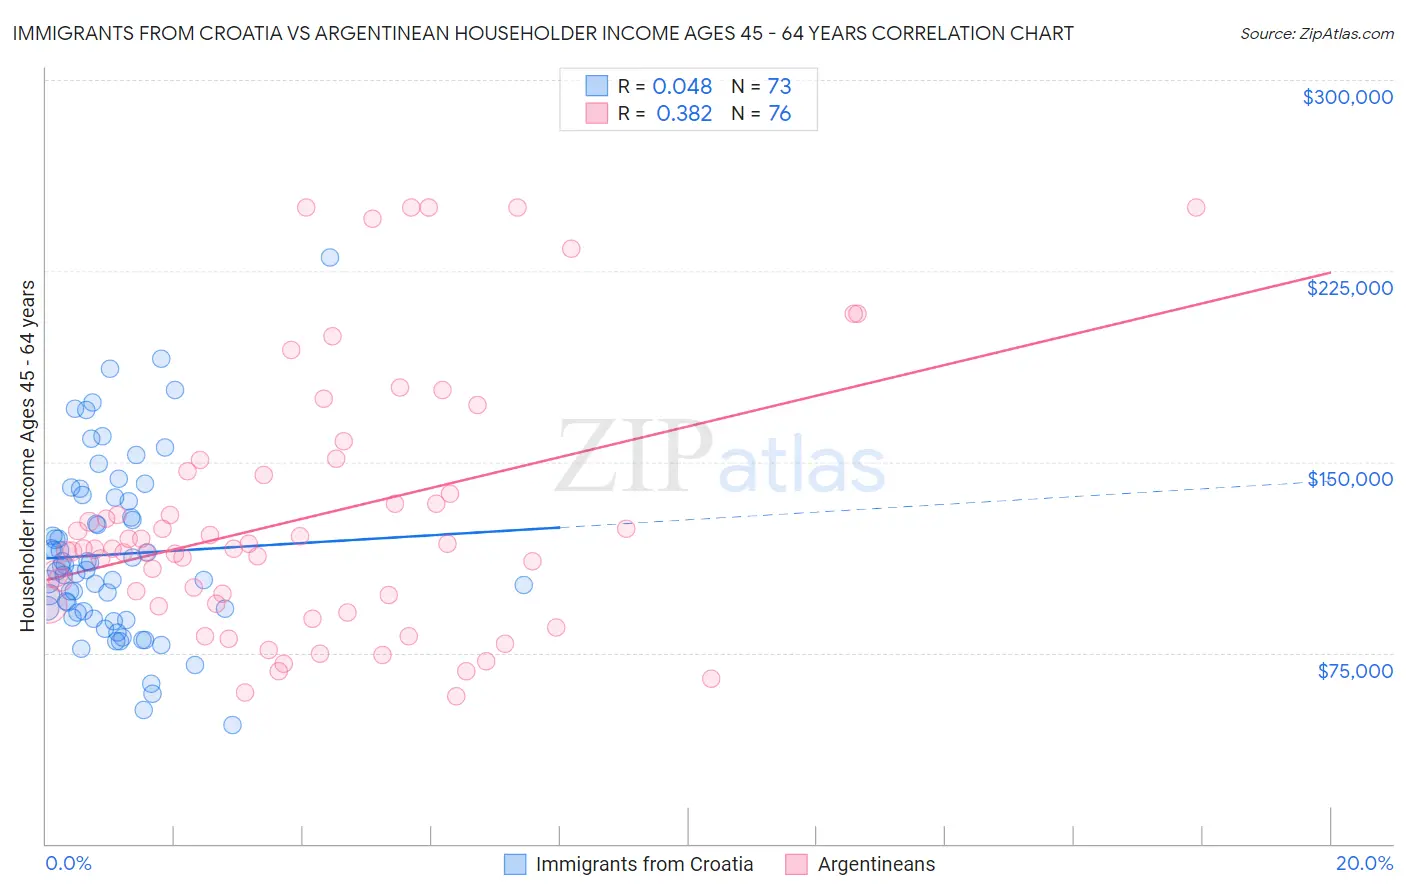 Immigrants from Croatia vs Argentinean Householder Income Ages 45 - 64 years